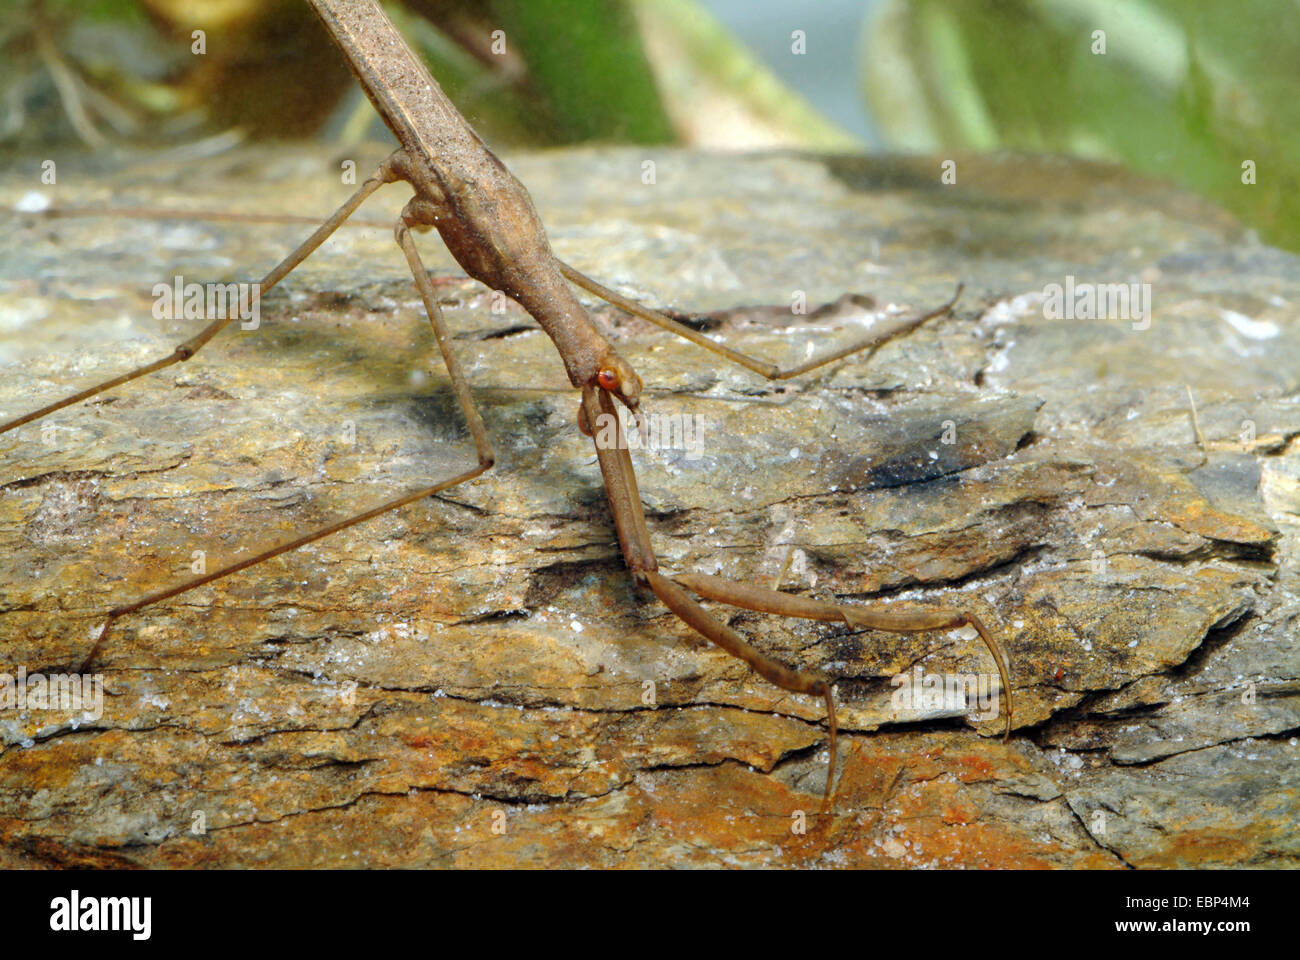 Water Stick Insect, Long-bodied Water Scorpion (Ranatra linearis), diving, portrait, Germany Stock Photo